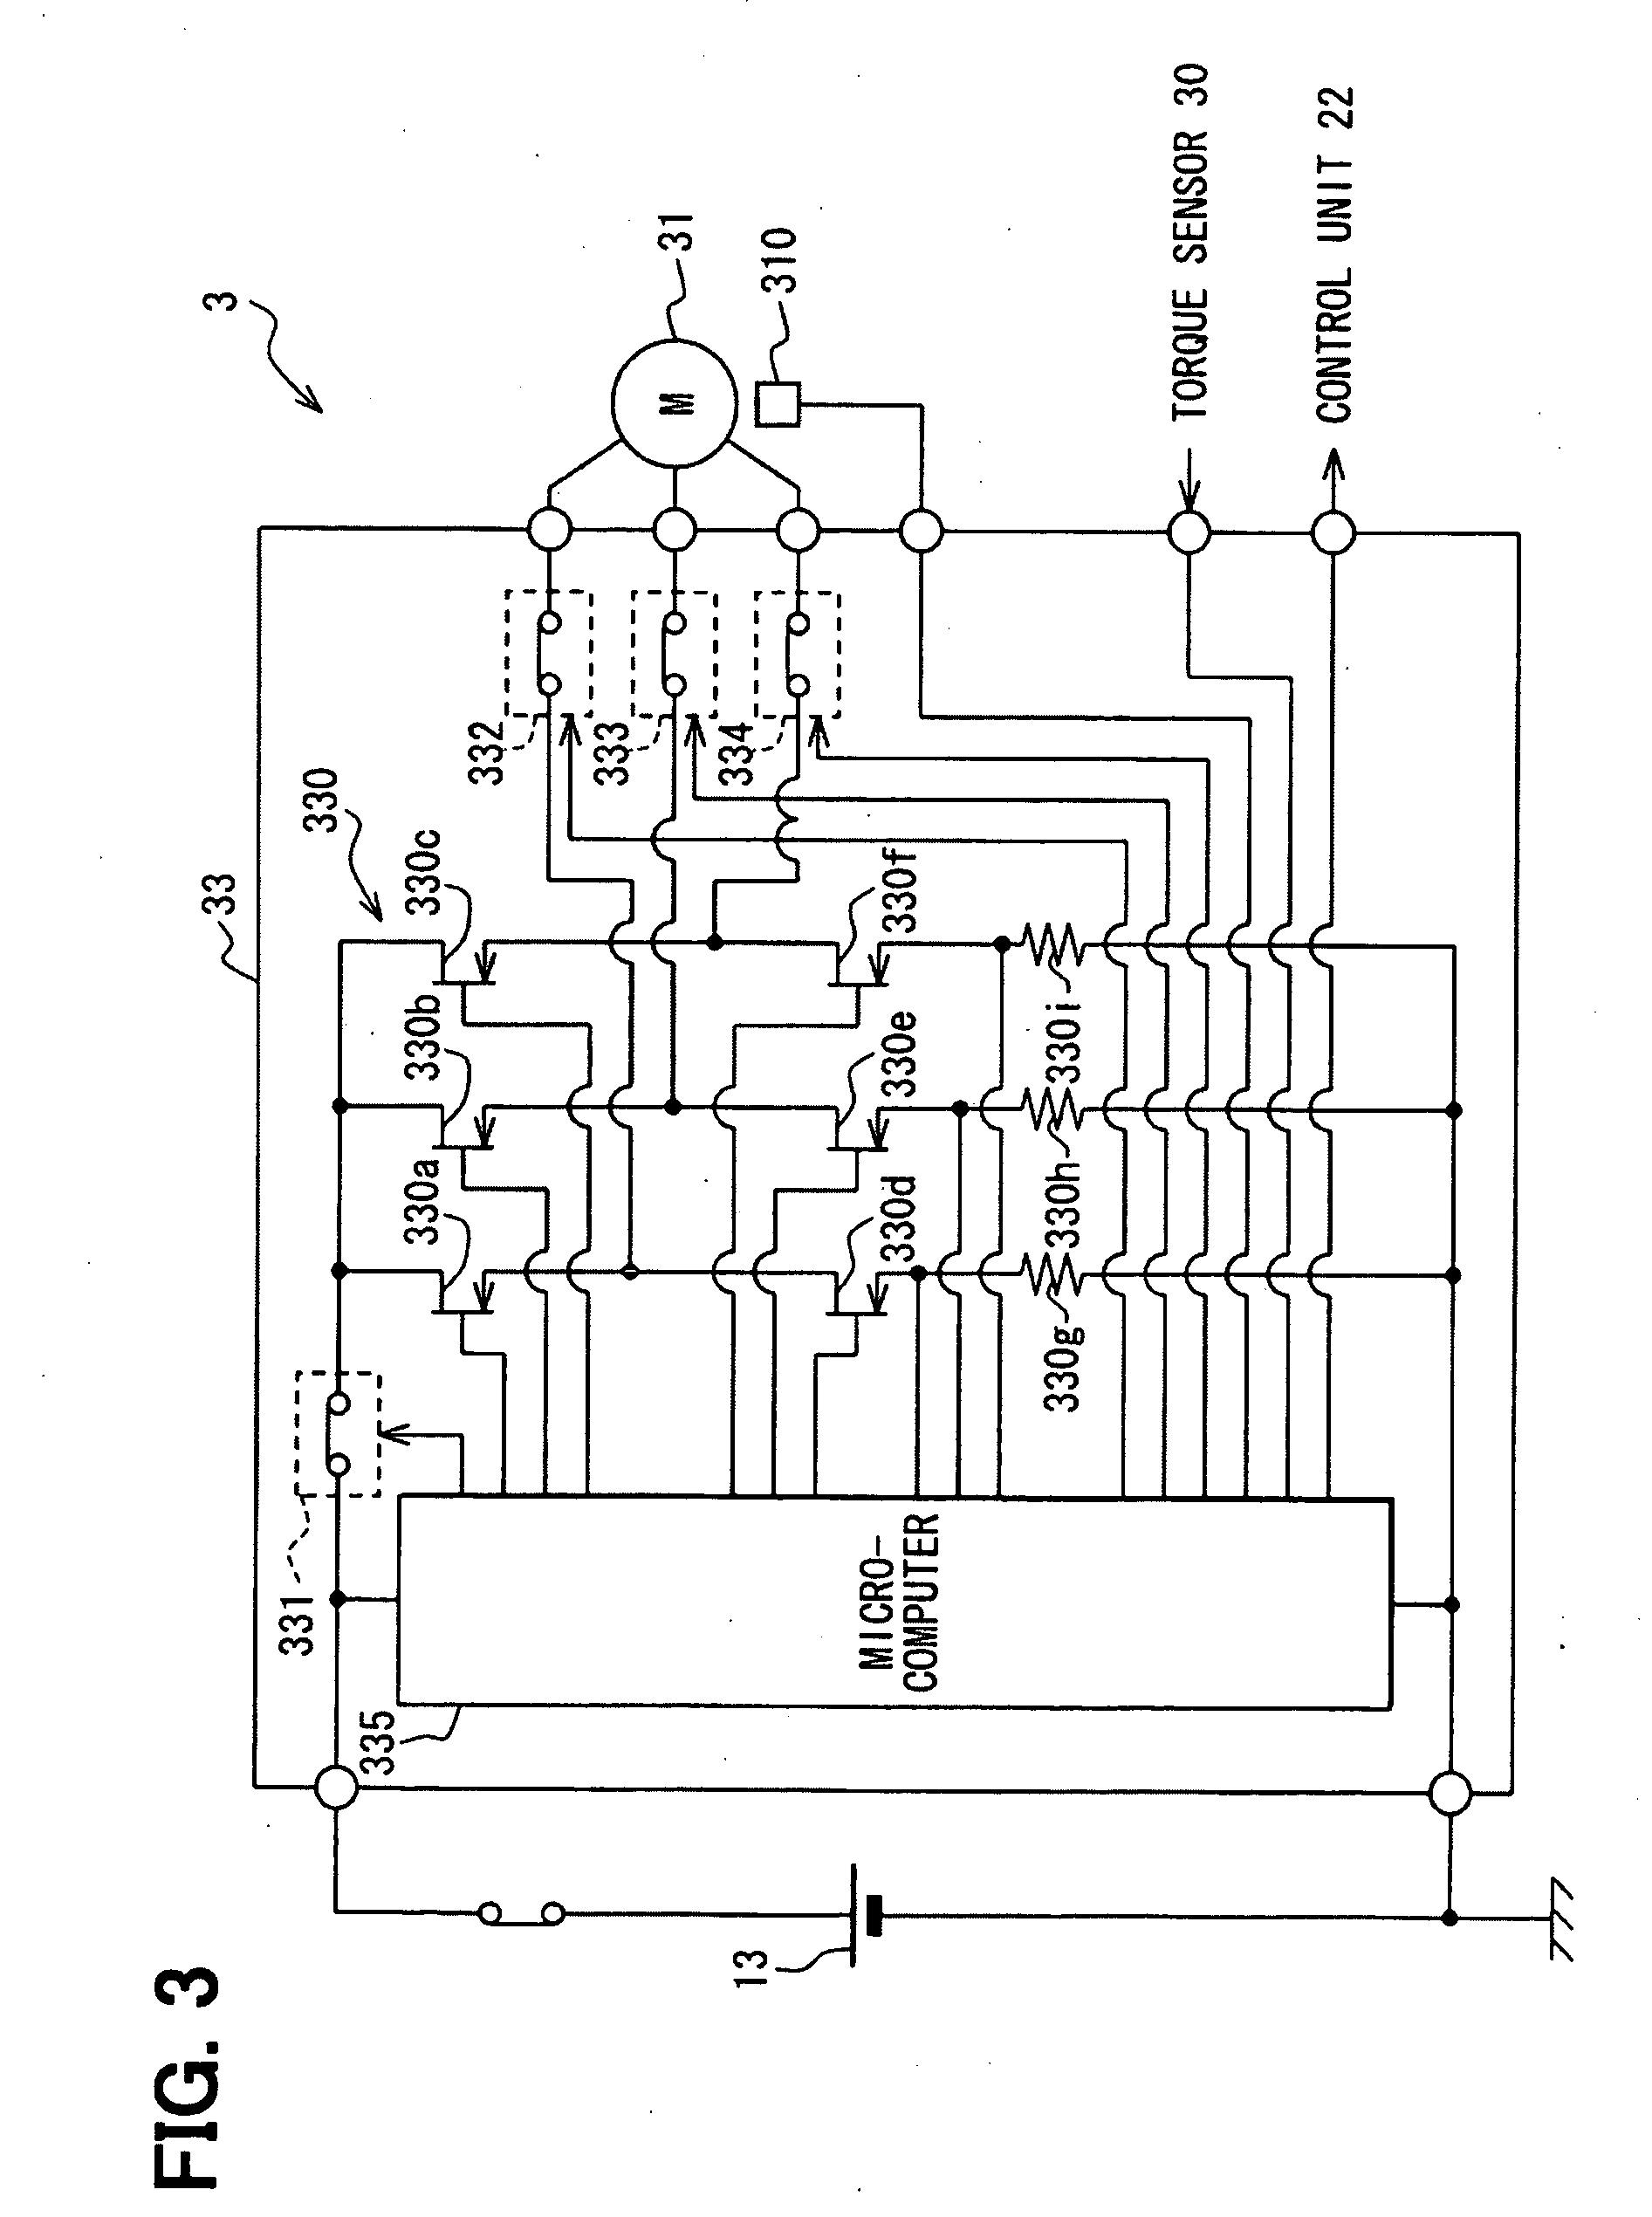 Steering assisting system for vehicle